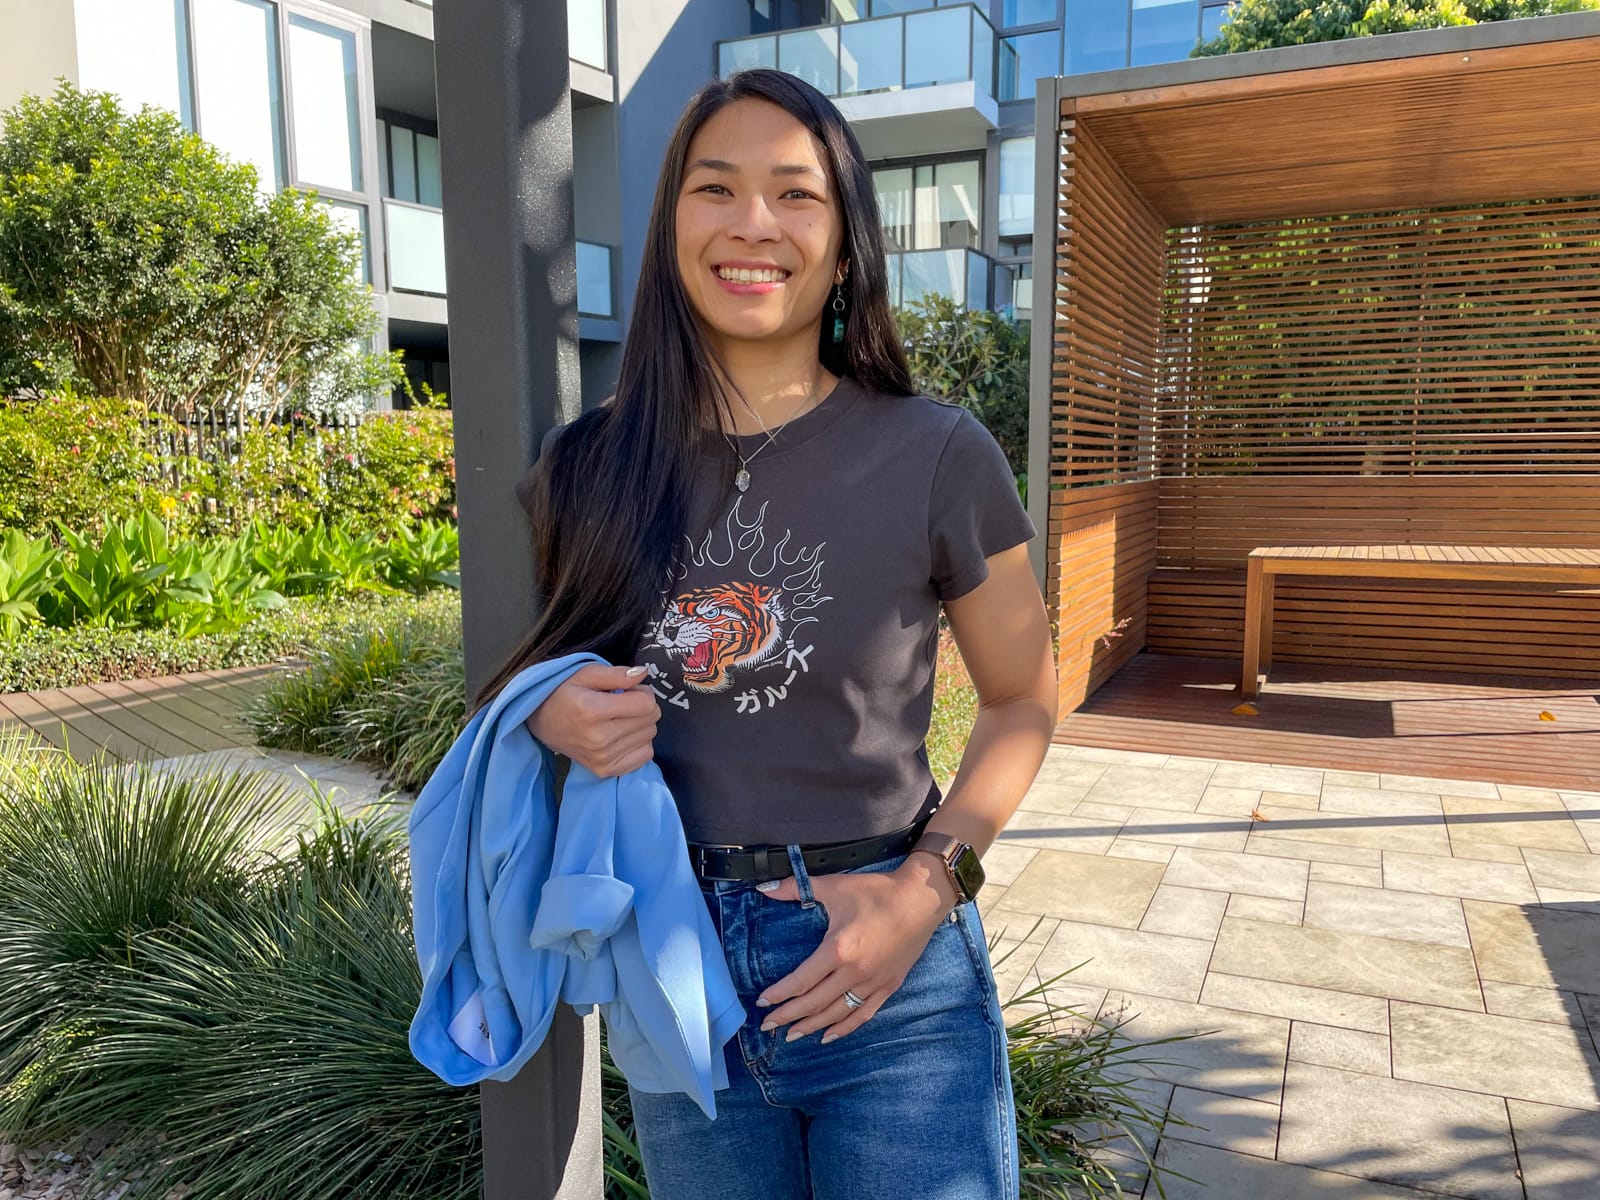 An Asian woman with dark hair, smiling. She is leaning against a square pole and has a thumb in one of the belt loops of her jeans. She is wearing a dark grey graphic tee and carrying a light blue blazer. In the background is a wooden cabana with a wooden table, some apartment buildings, and some planted trees.